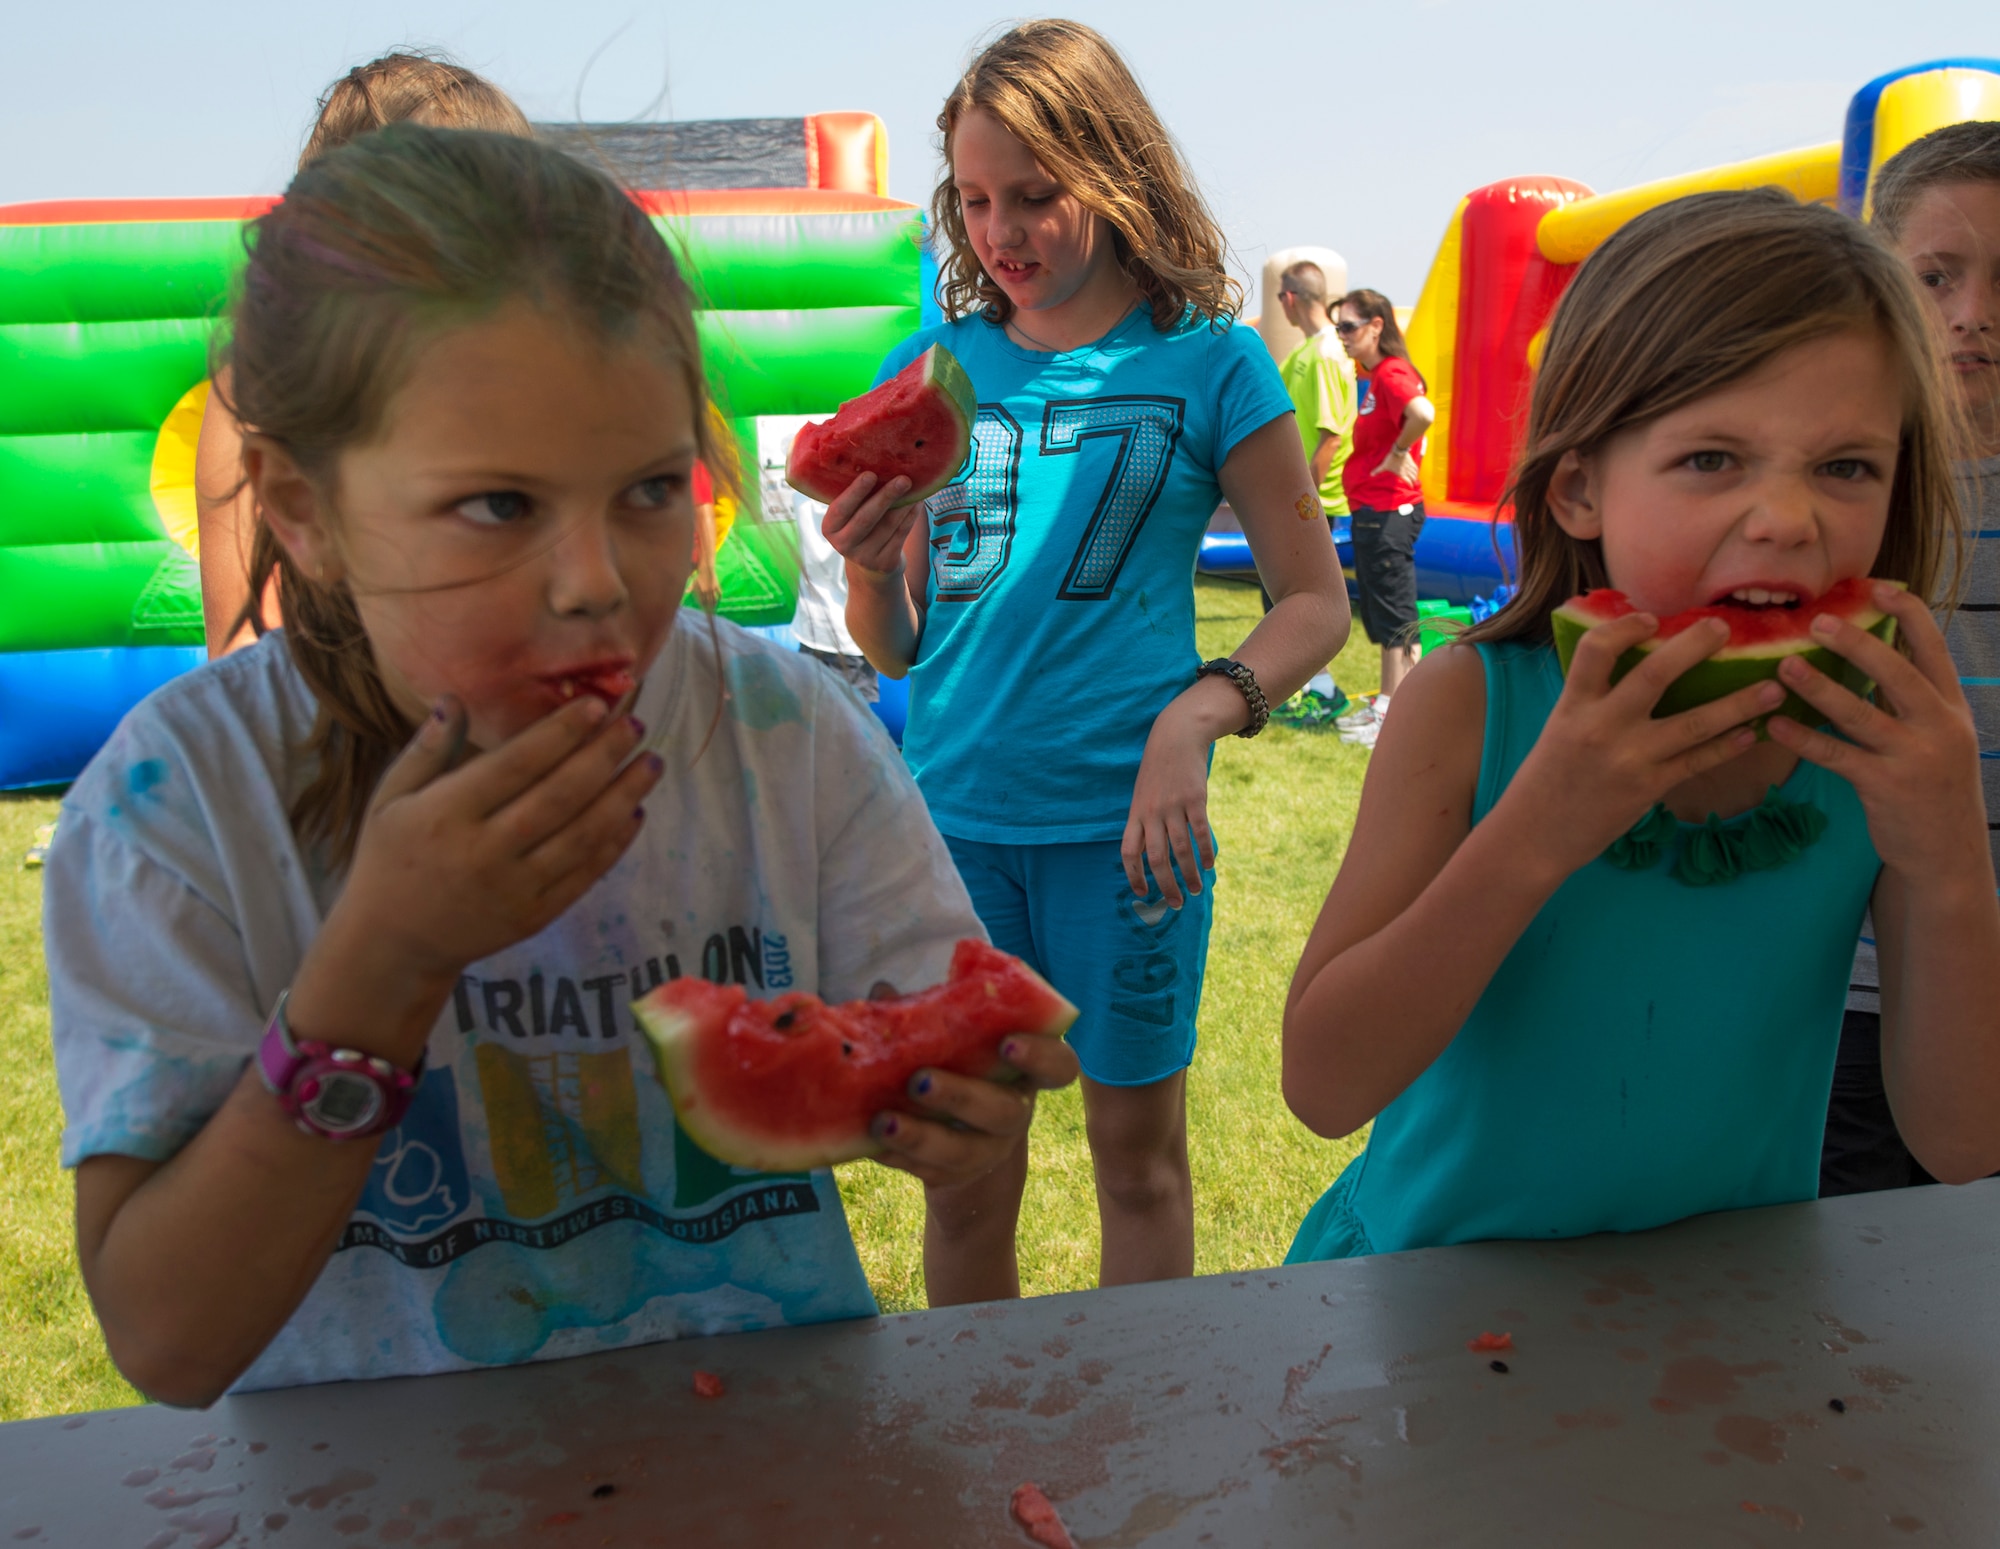 Hannah Bowman and Brooke Williford, both 8, compete in a watermelon eating contest during the annual Frontiercade event on F.E. Warren Air Force Base, Wyo., Aug. 21, 2015. Hannah is the daughter of Christina and Lt. Col. Joshua Bowman, 582nd Helicopter Group deputy commander, while Brooke is the daughter of Maria and Lt. Col. Rusty Williford, 320th Missile Squadron commander. Frontiercade is meant to give F.E. Warren Airmen and their families a day of games, sports and free food before the start of the new school year. (U.S. Air Force photos by R.J. Oriez/Released)